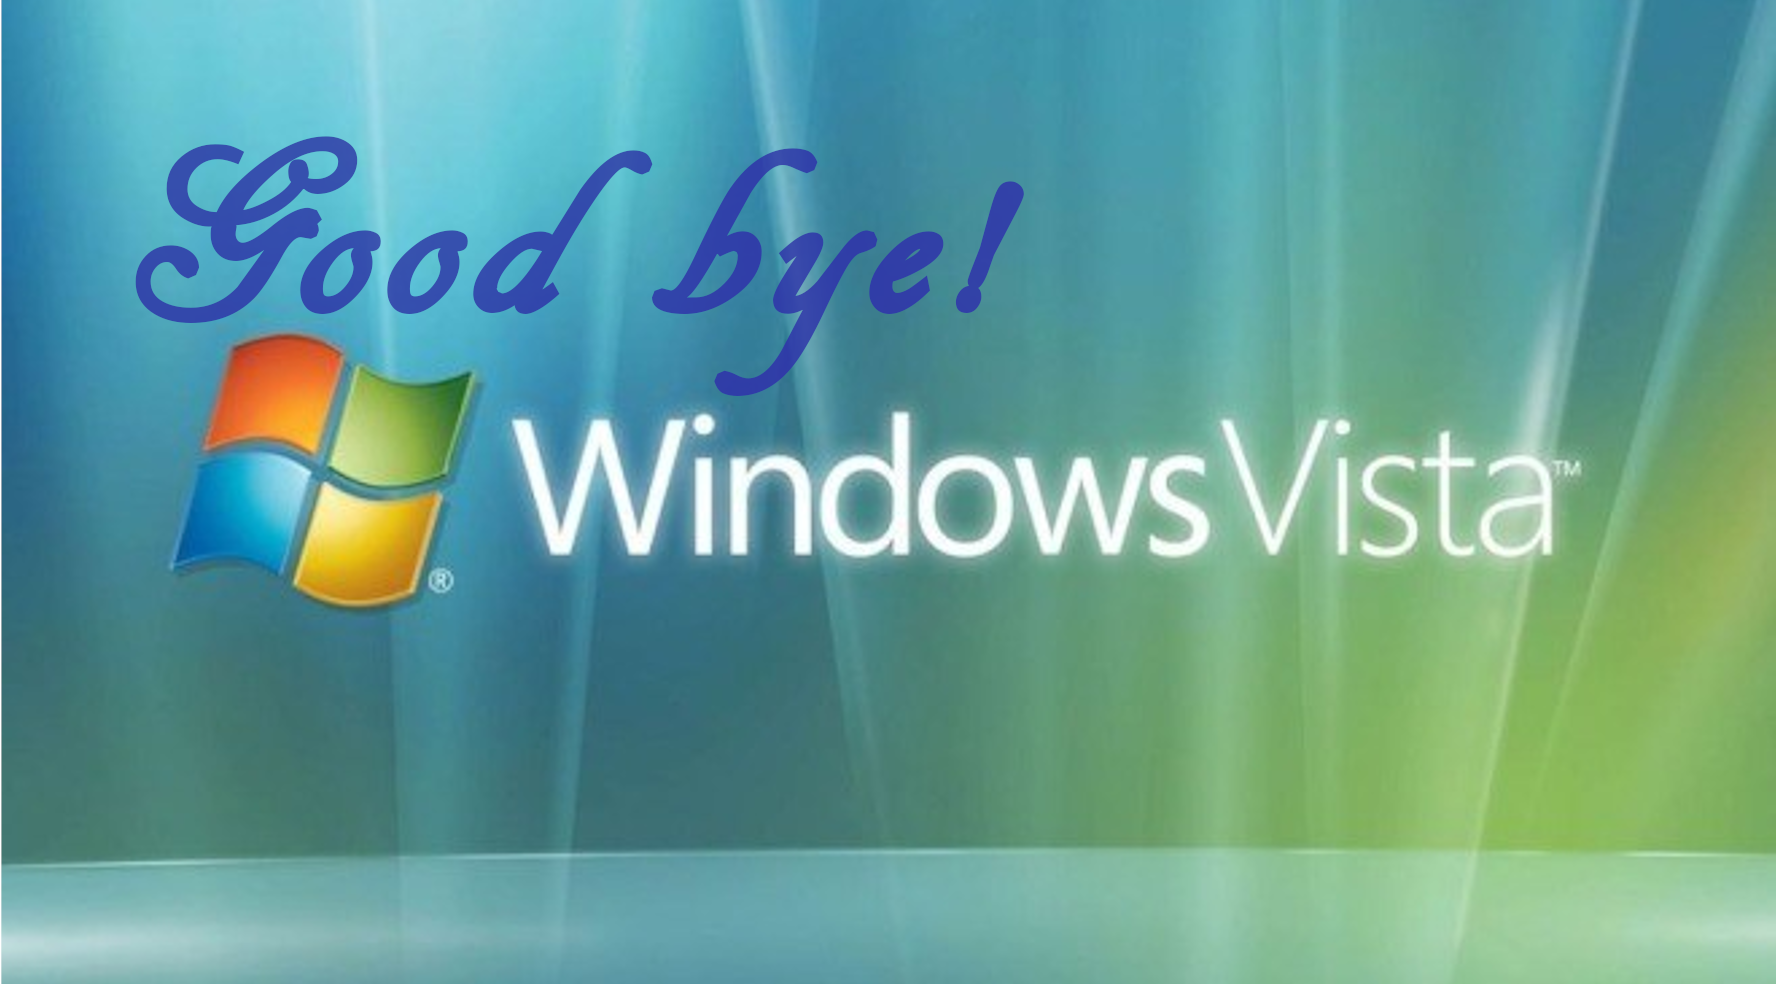 Upgrade your computer from Windows Vista to Windows 10 – Here’s how!